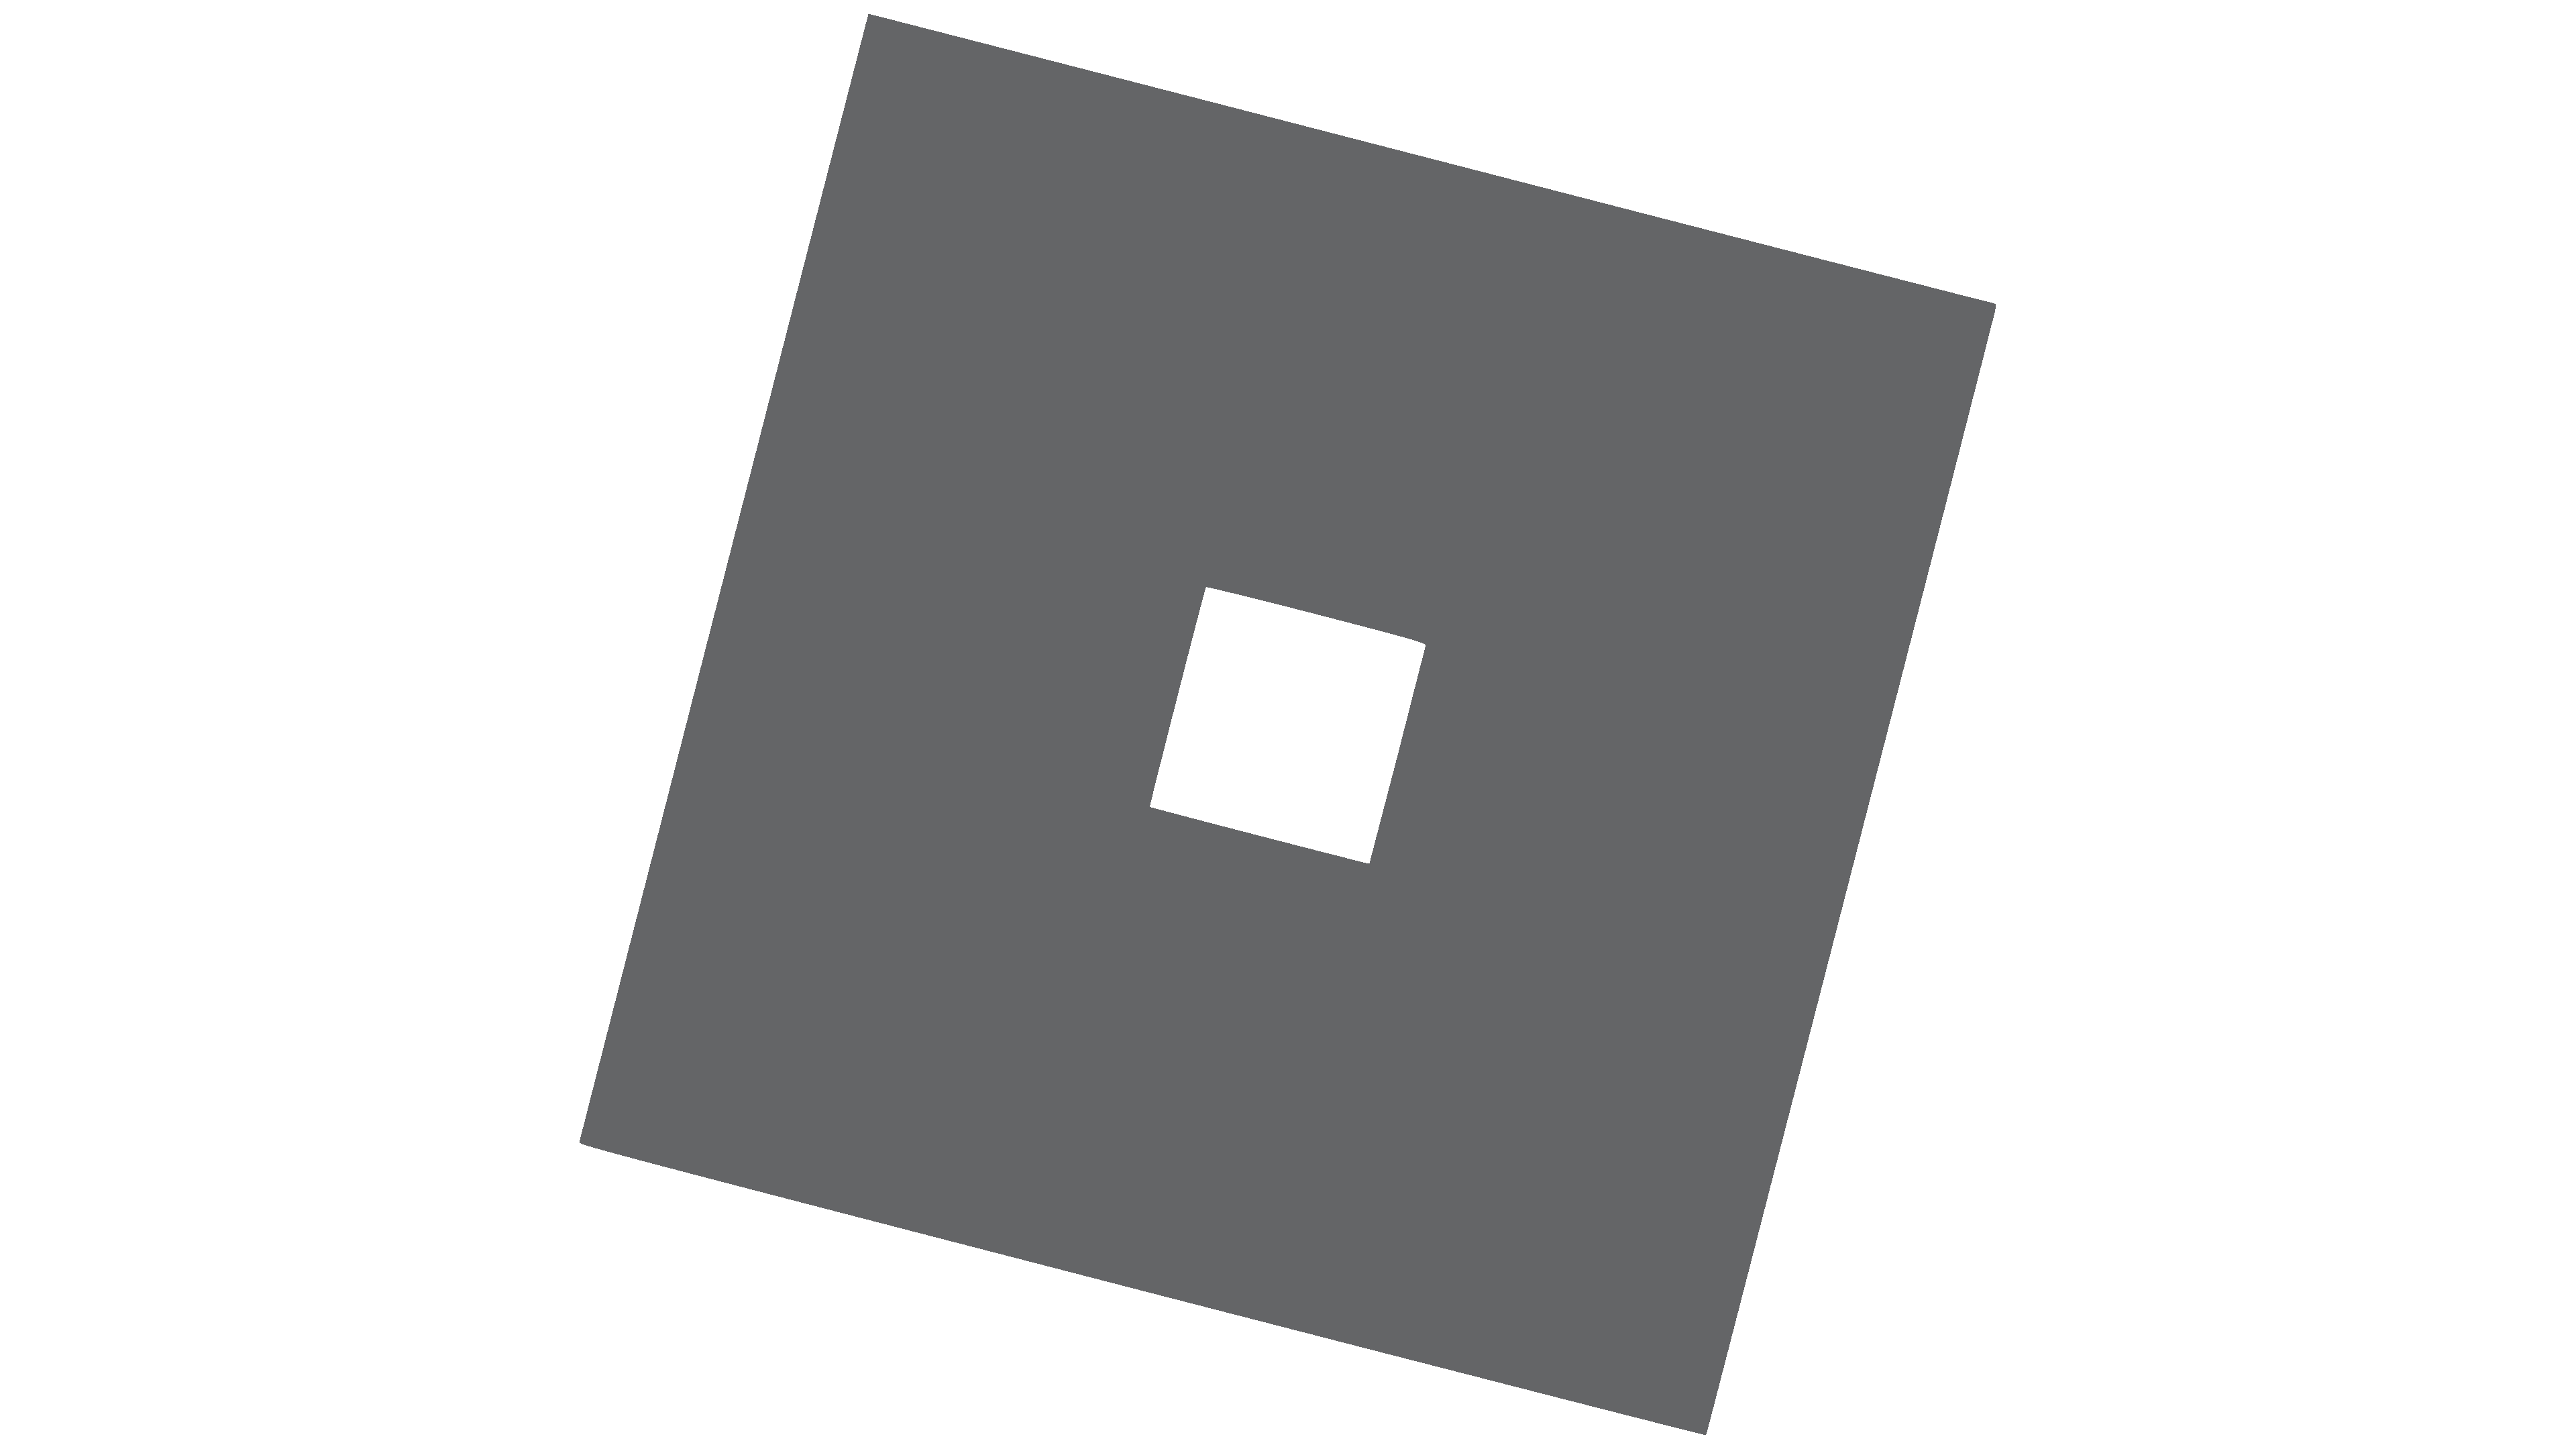 Roblox Logo, symbol, meaning, history, PNG, brand